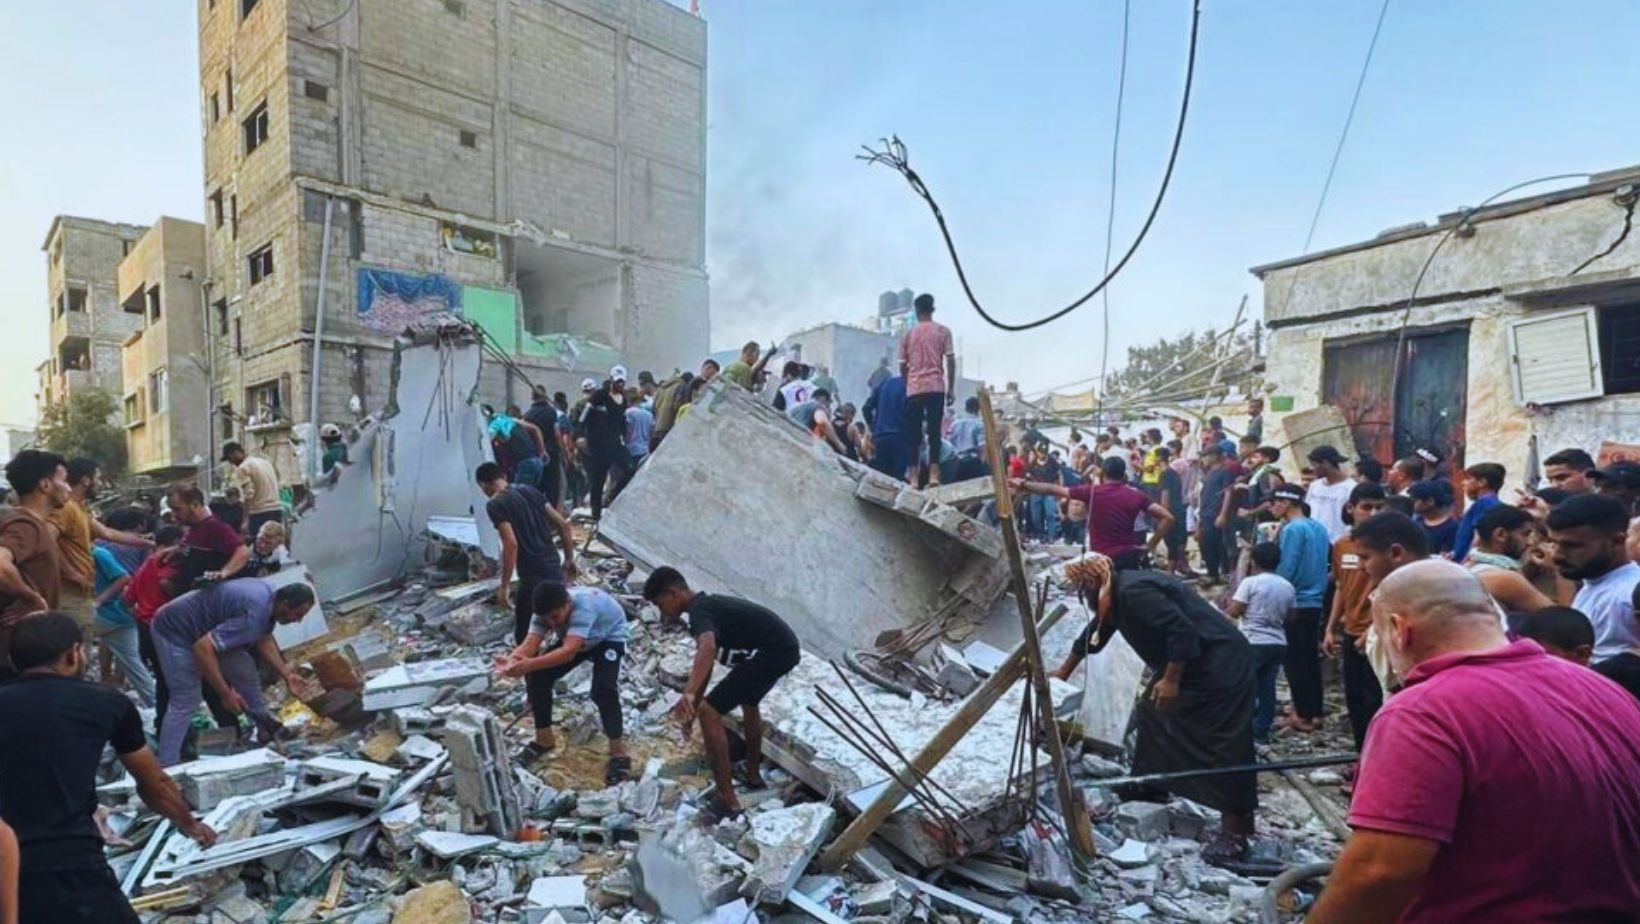 images of the destruction of the Palestinian city of Gaza by bombing by the Israeli army